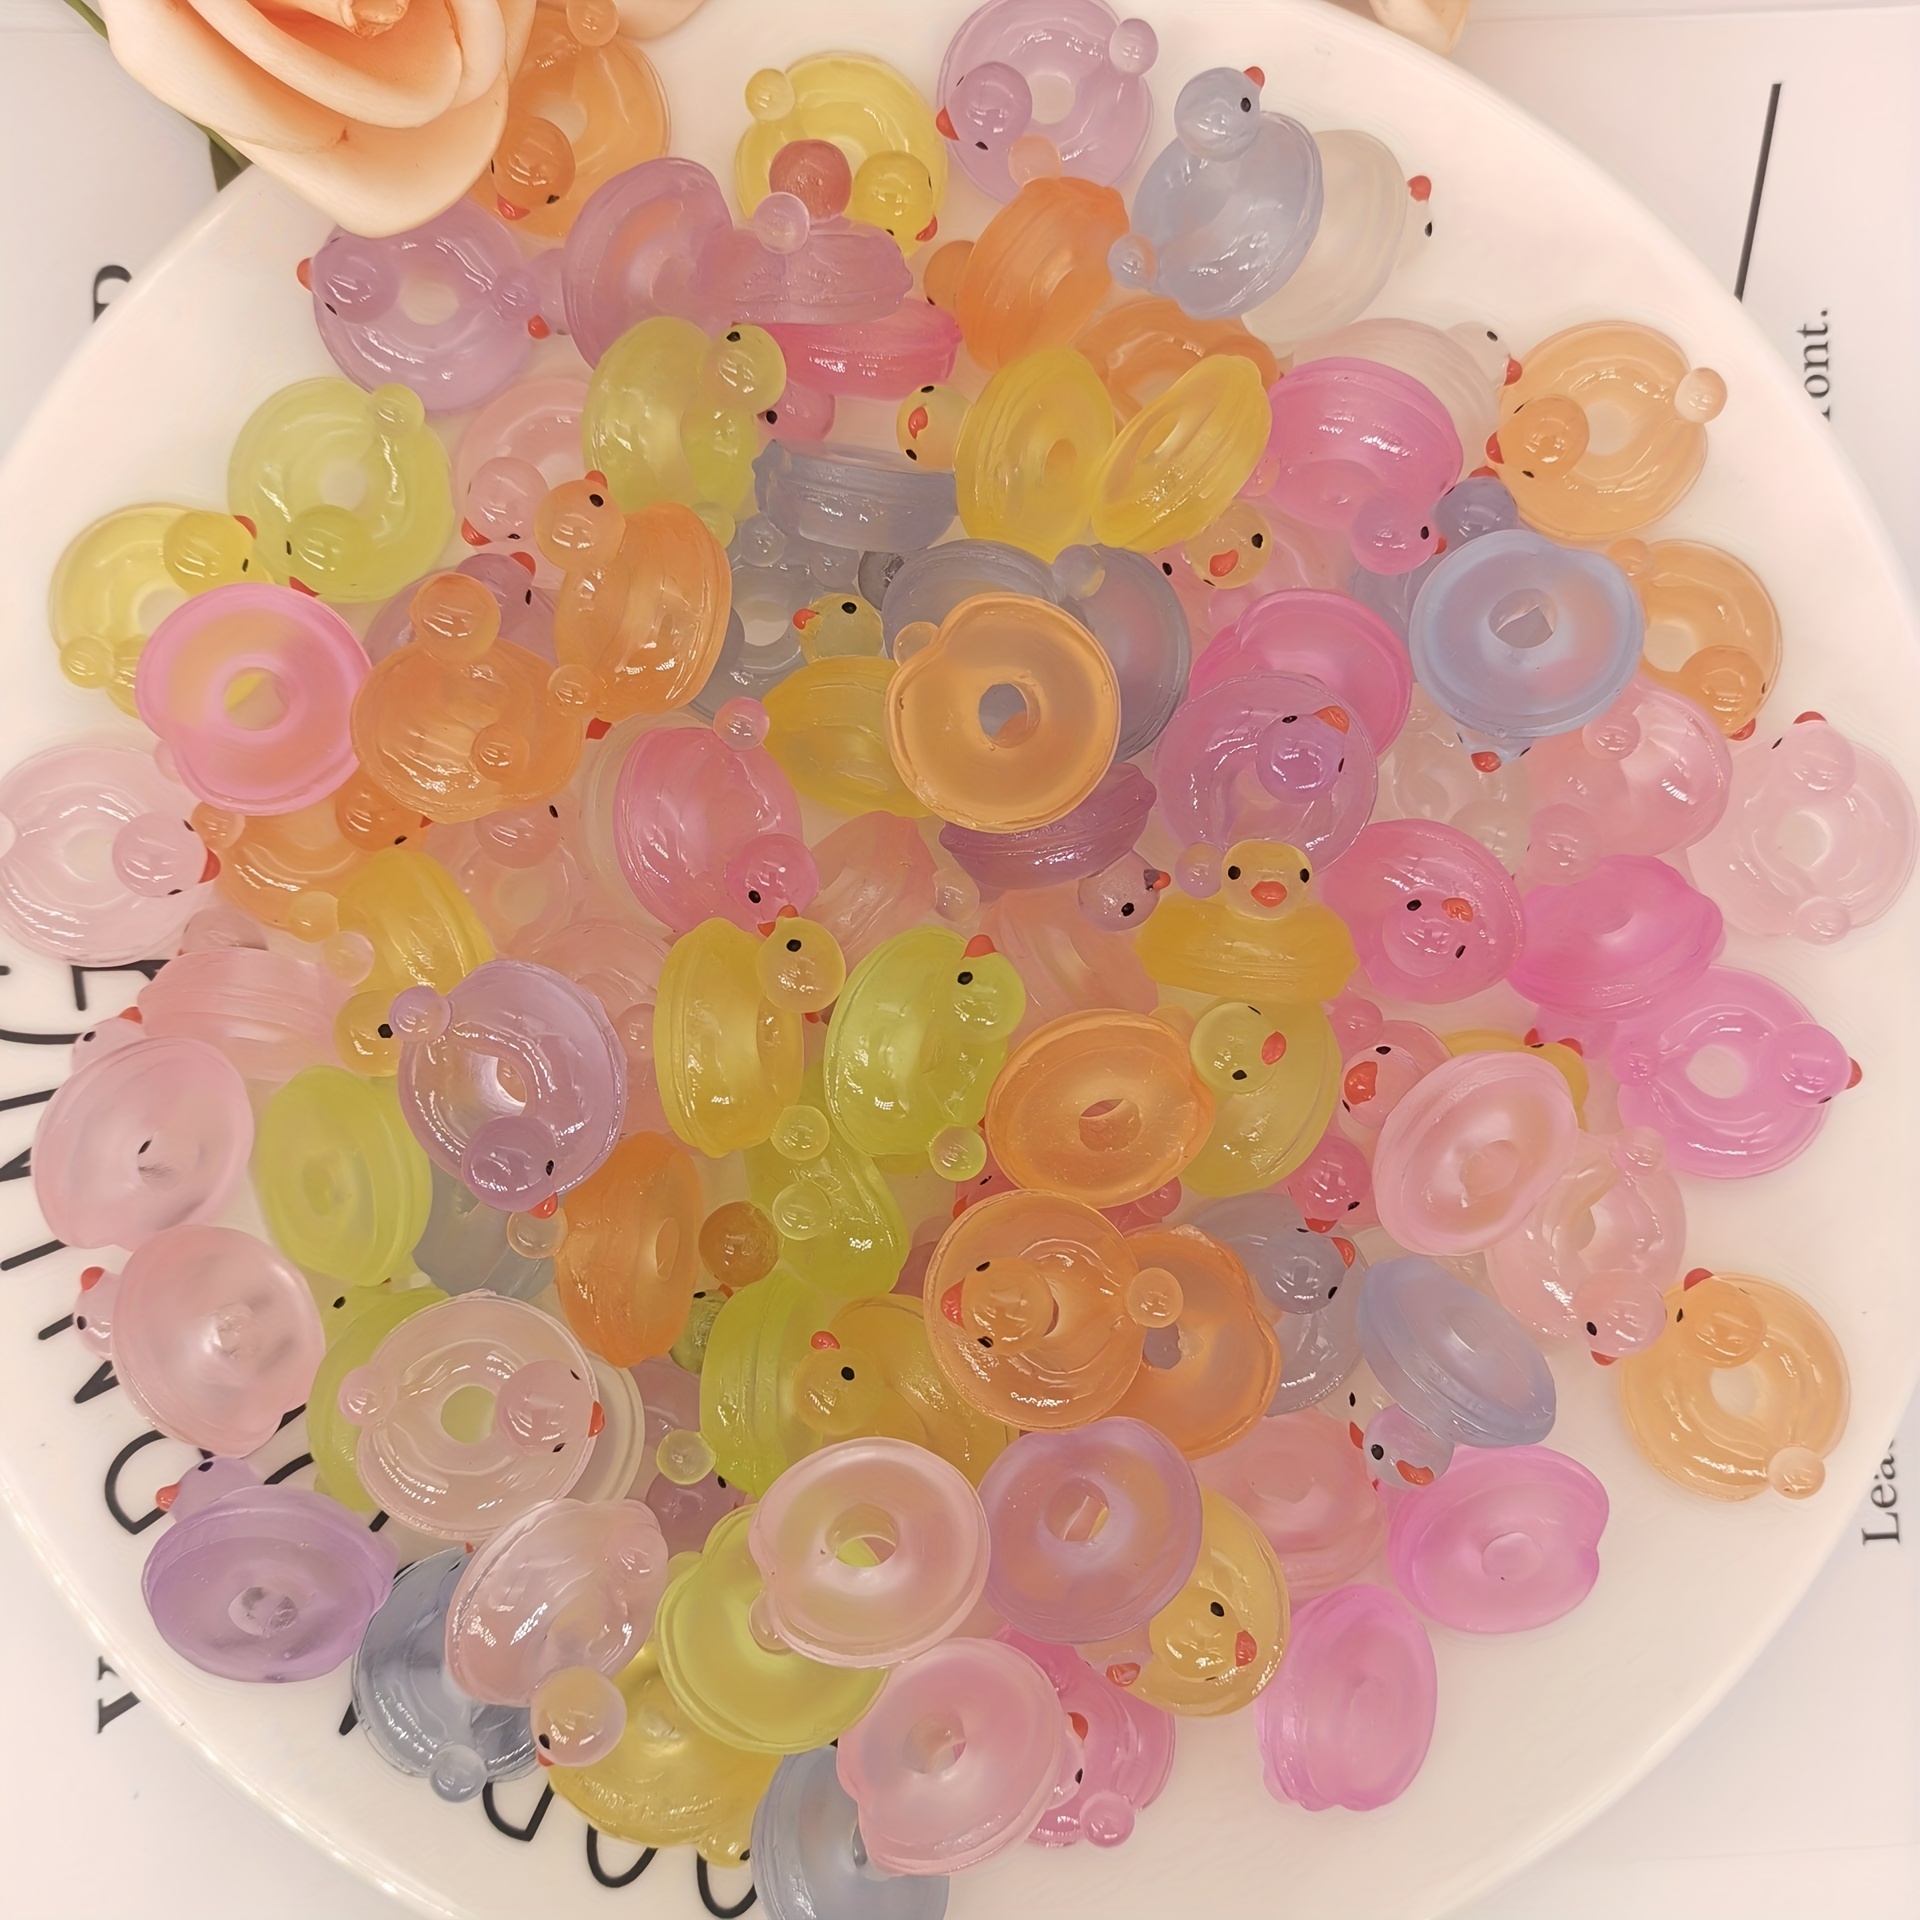 10Pcs Cartoon Cute Flower Resin Charms for Jewelry Making Crafts